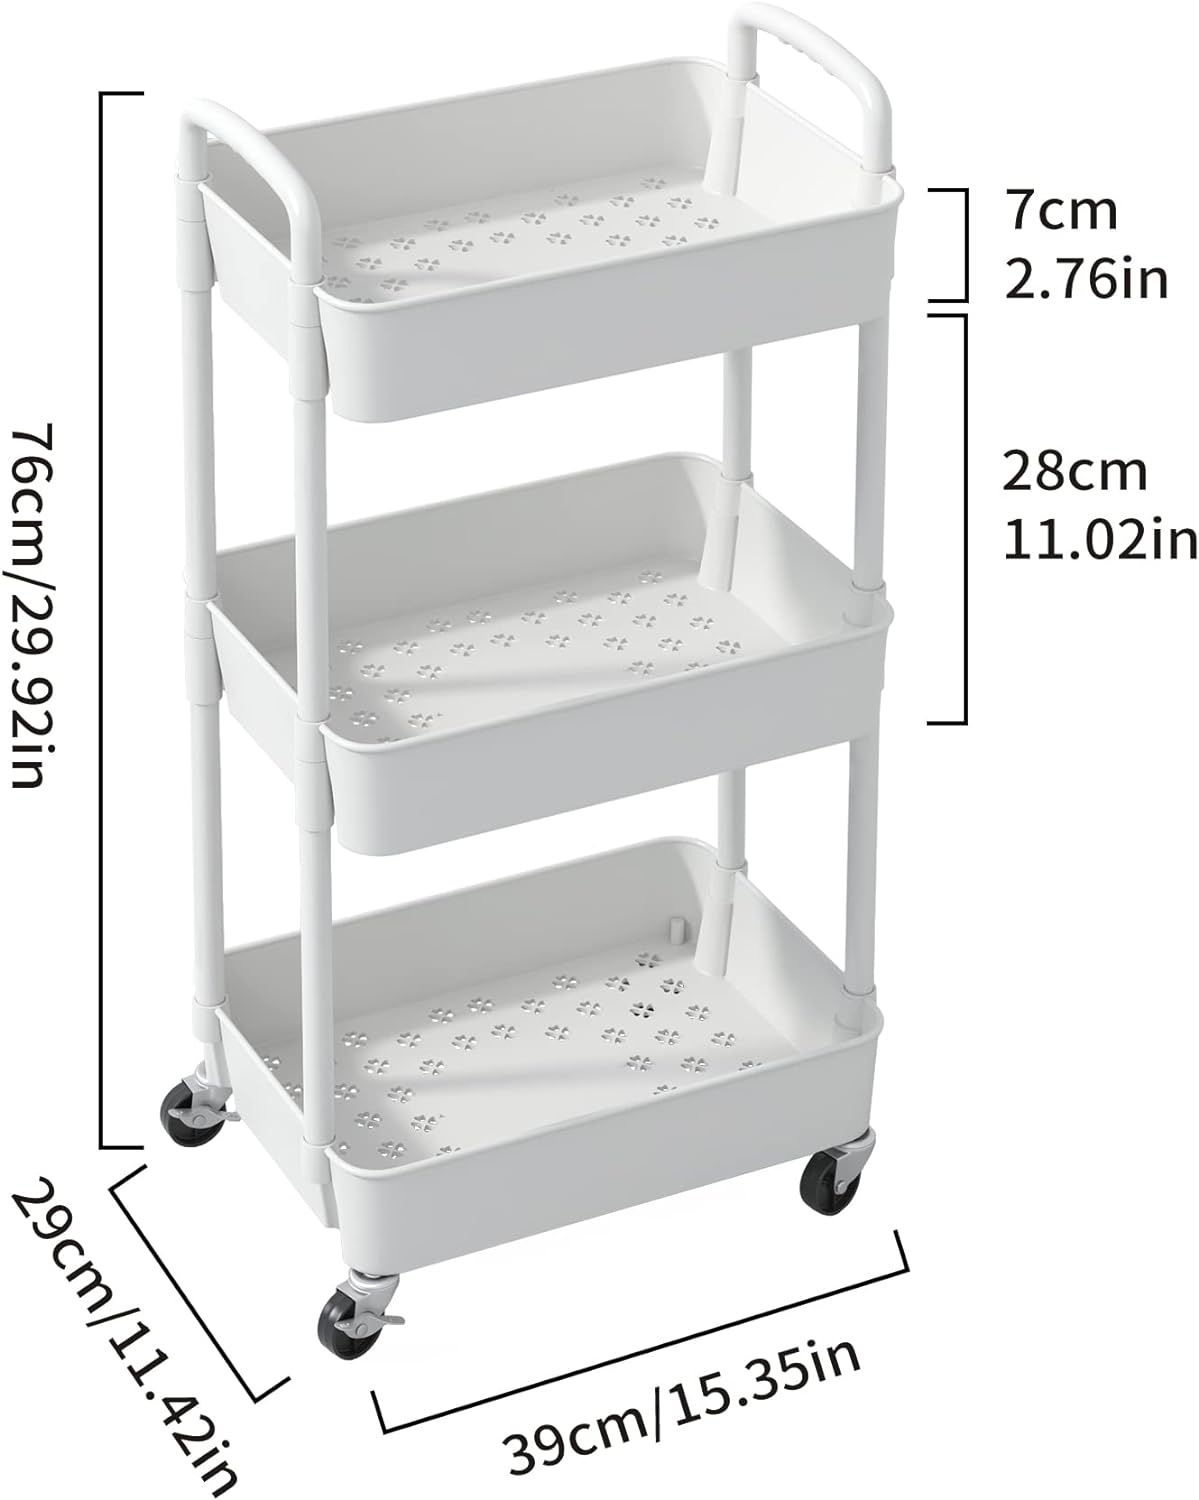 3 Tier Storage Rolling Cart with Wheels